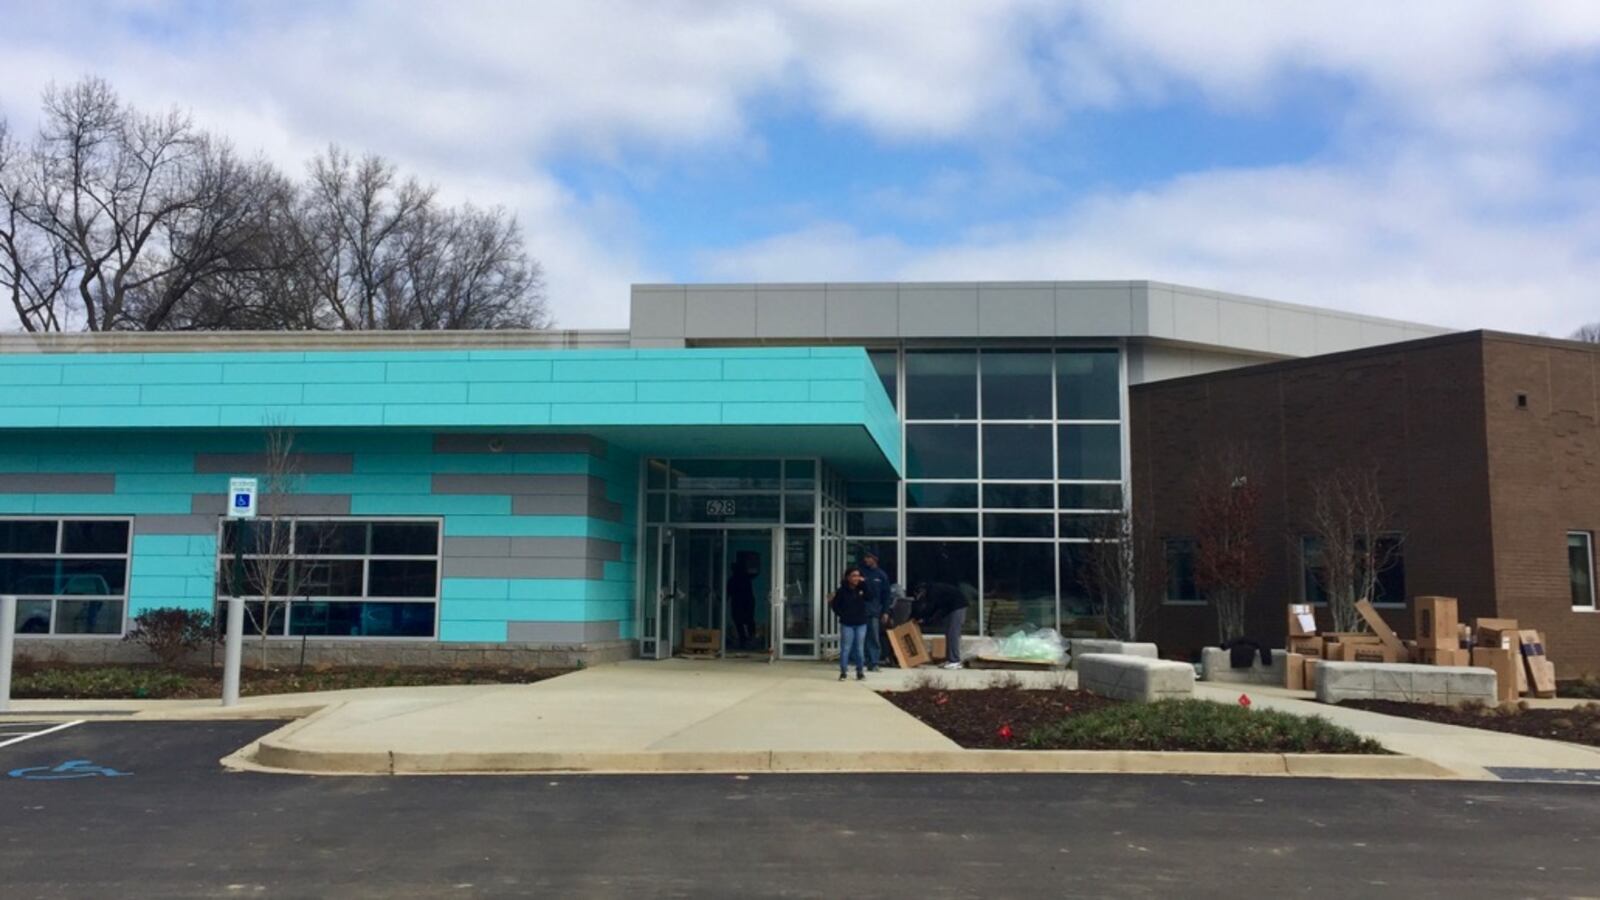 Porter-Leath's Early Childhood Academy readies for its grand opening on Friday. The center features a state-of-the-art preschool and teacher training institute.